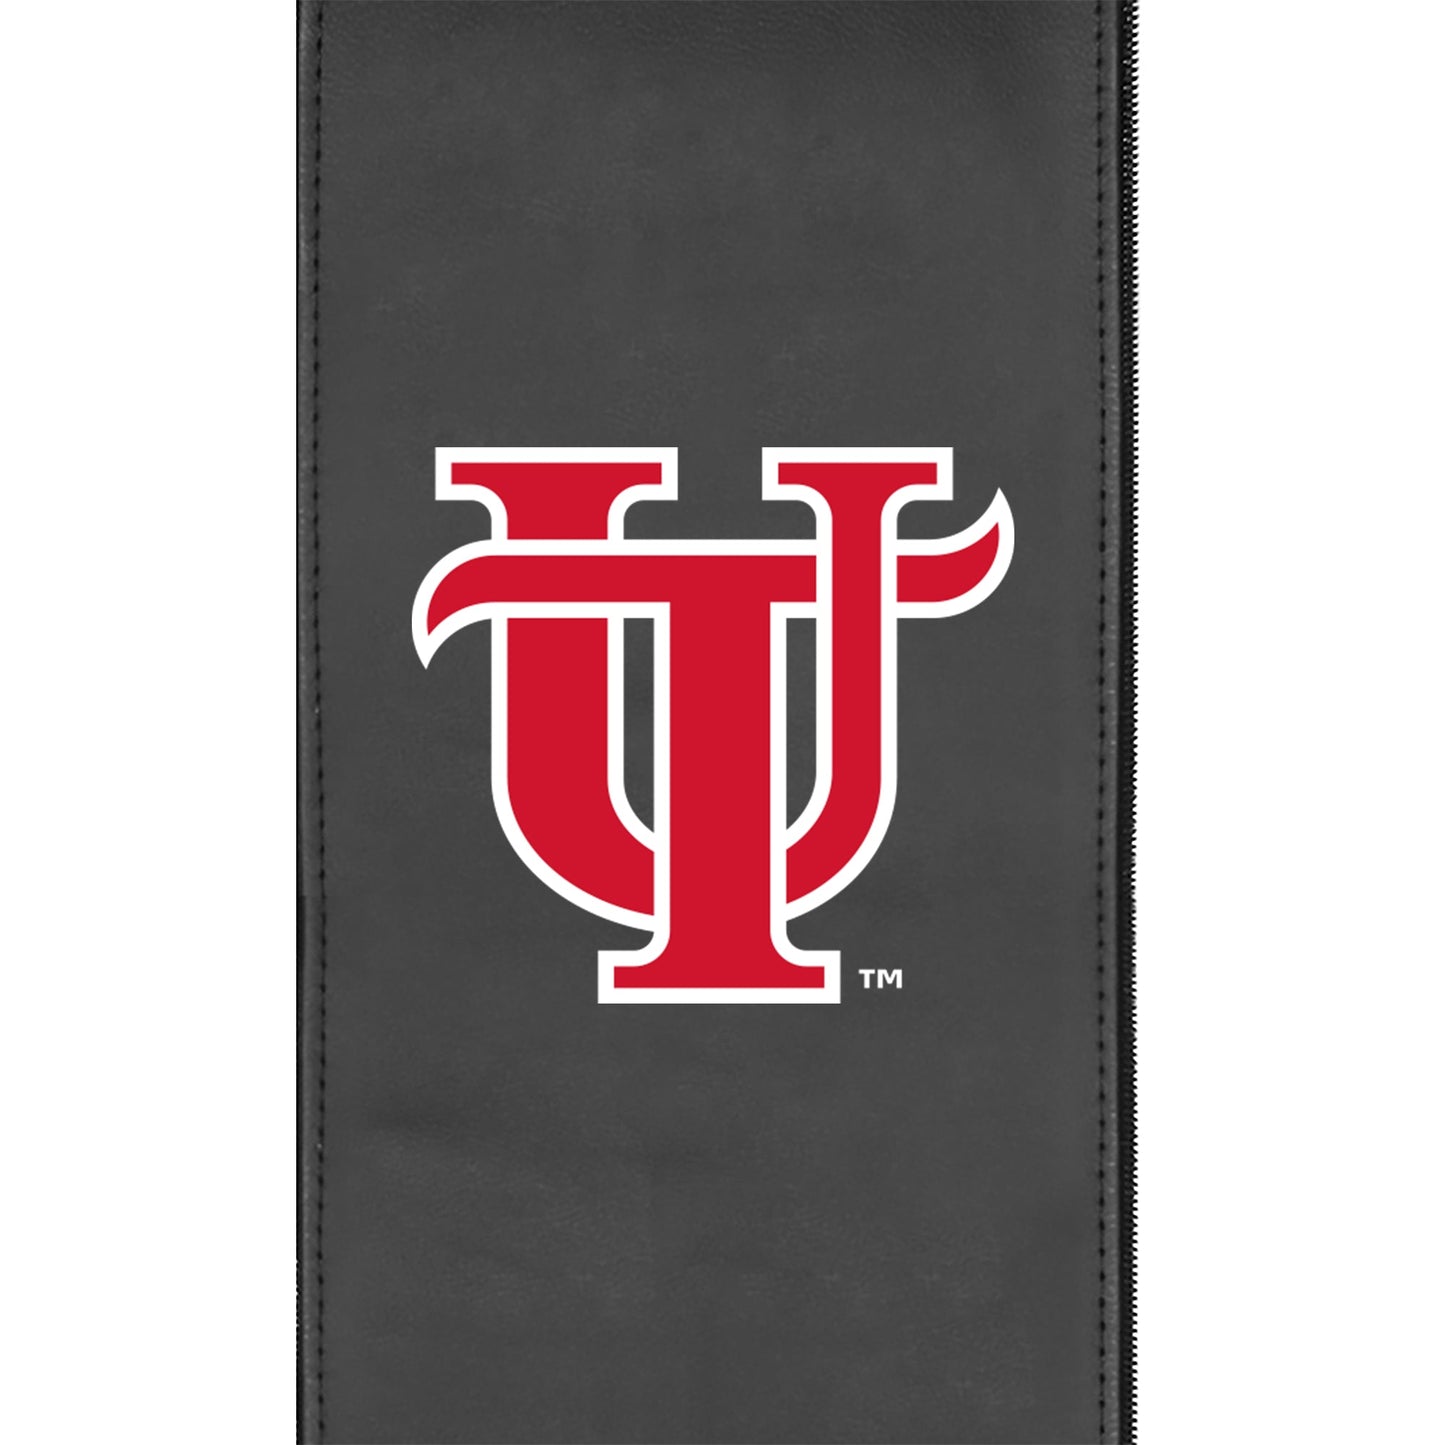 Stealth Power Plus Recliner with Tampa University Primary Logo